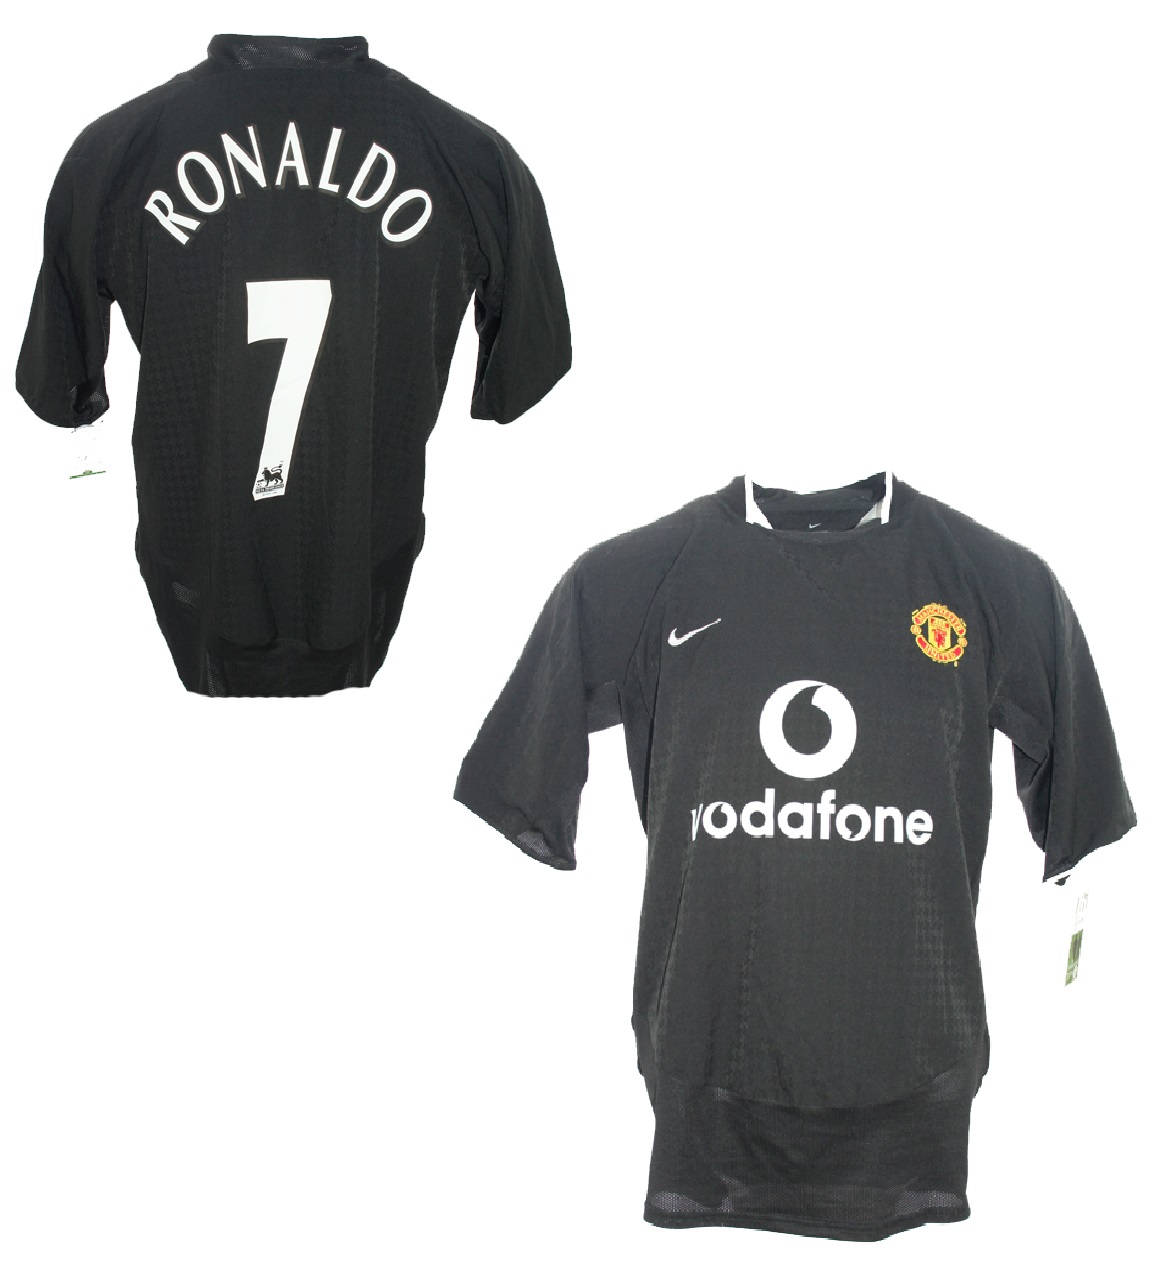 buy manchester united jersey online cheap